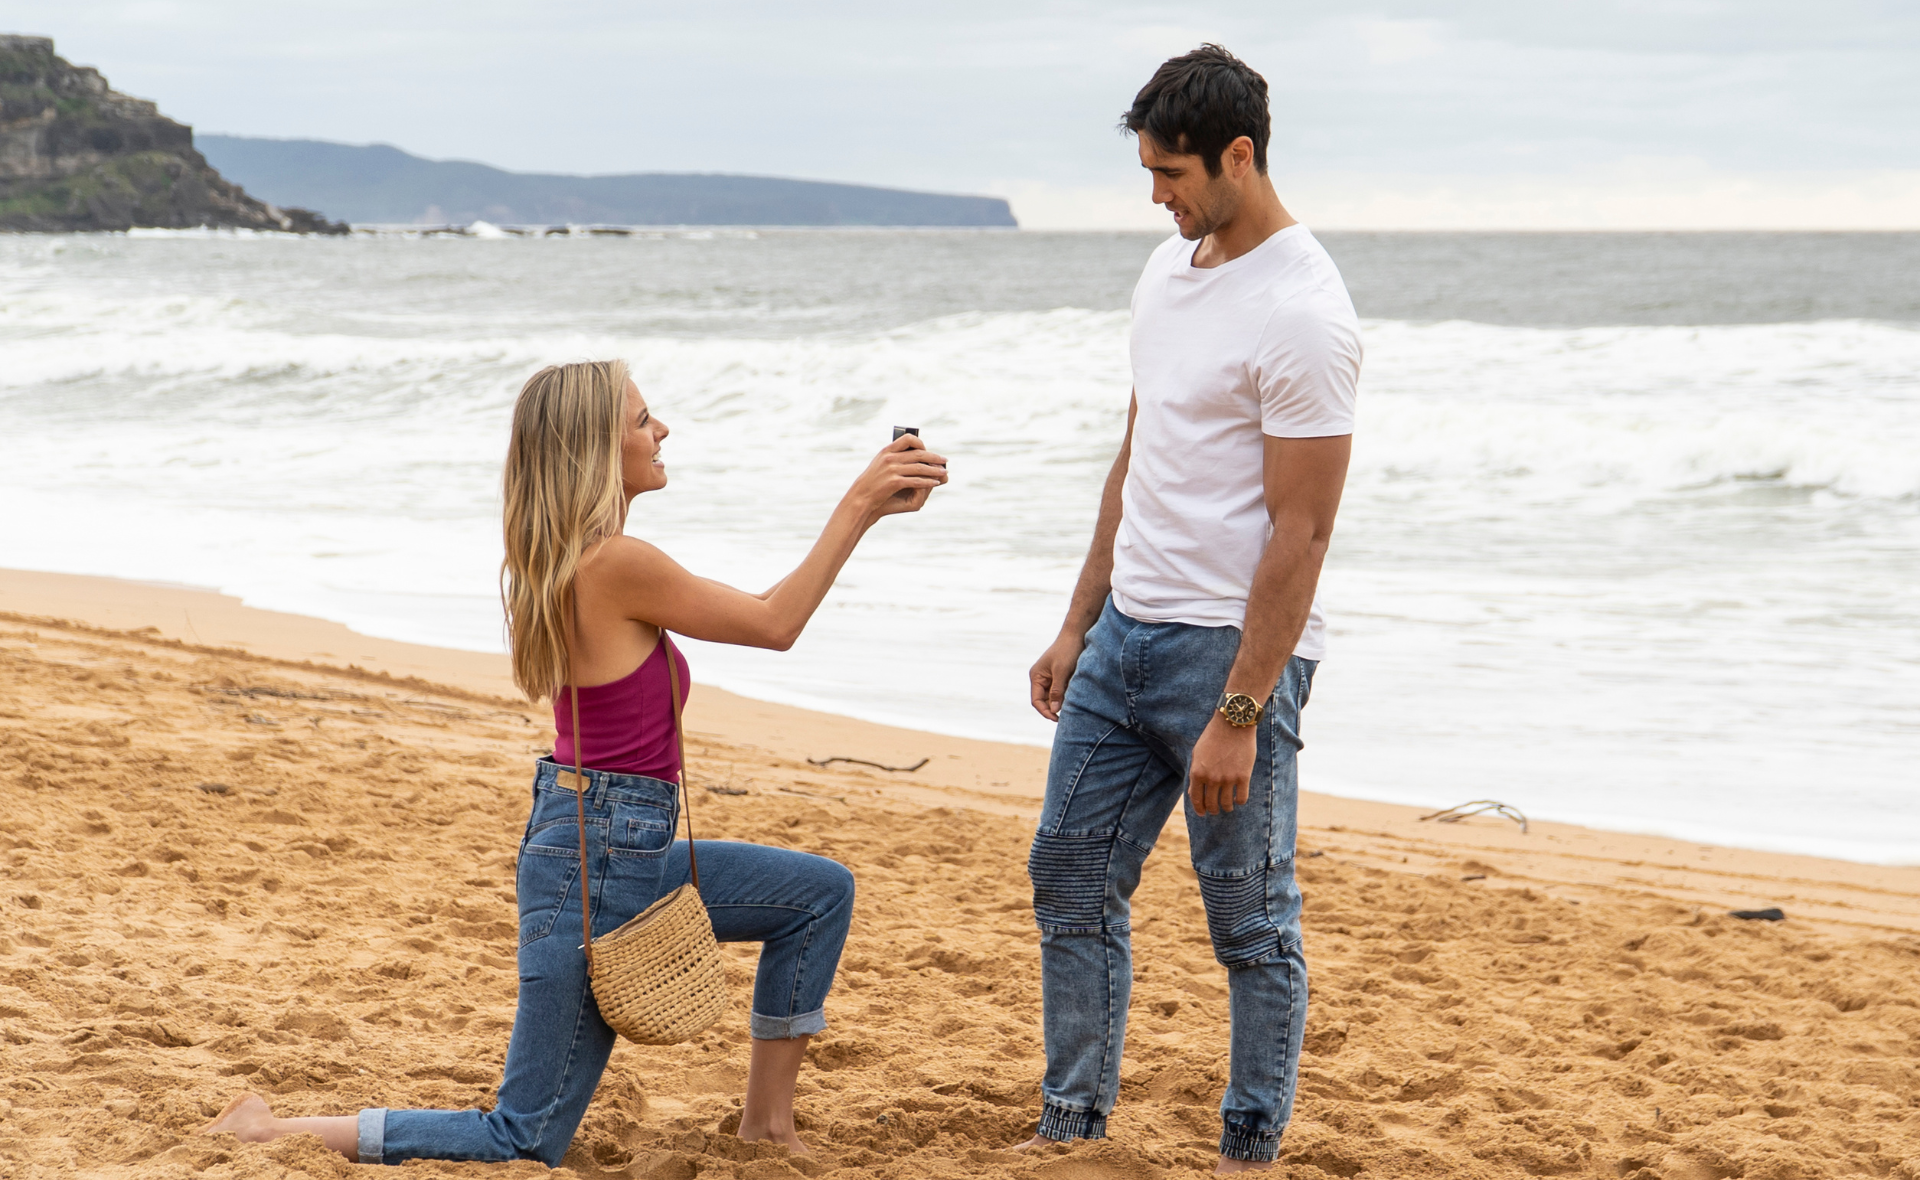 Home and Away SPOILERS: Felicity wants a second chance – but will Tane say yes?